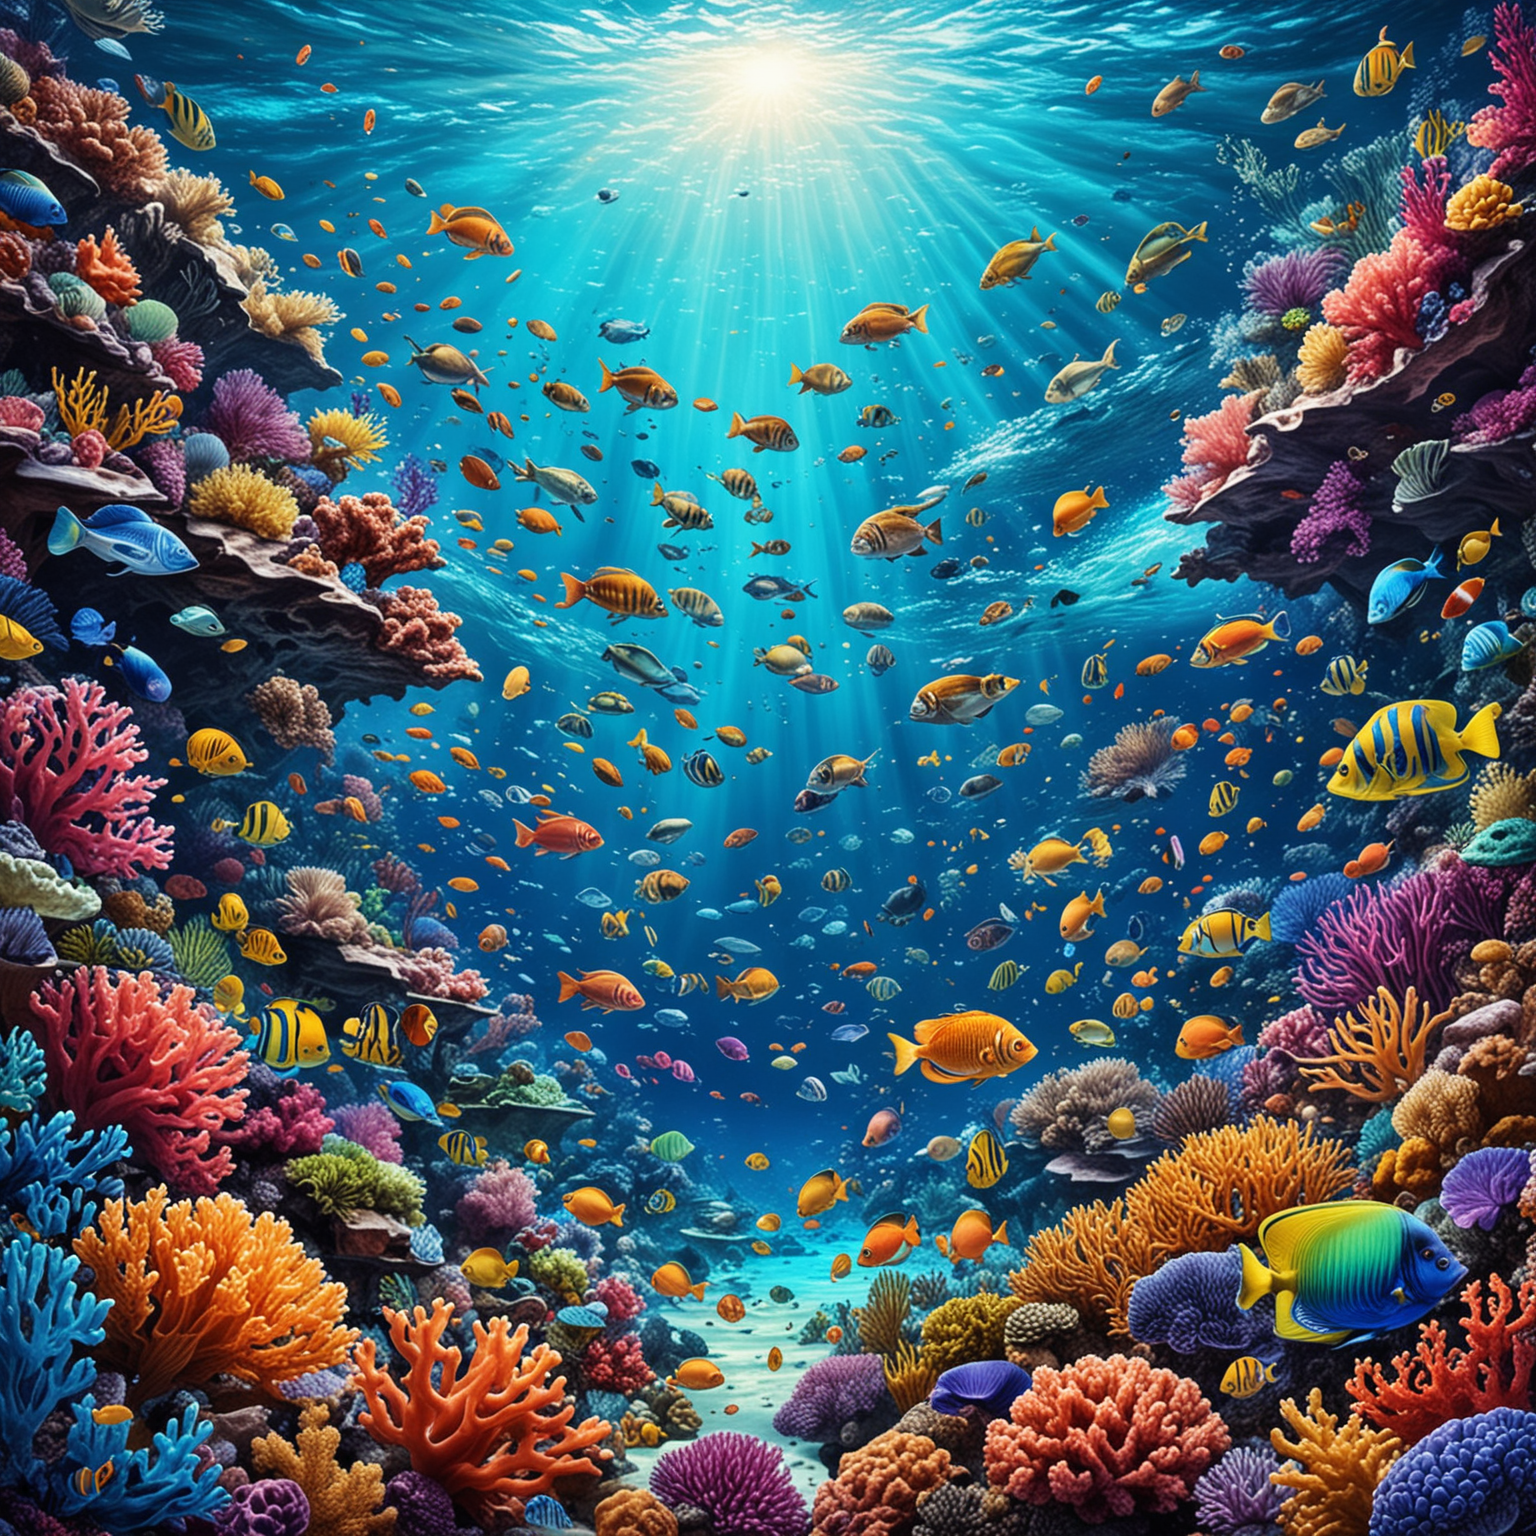 Vibrant Underwater World Colorful Ocean with Fish Coral Reefs and Sea Creatures